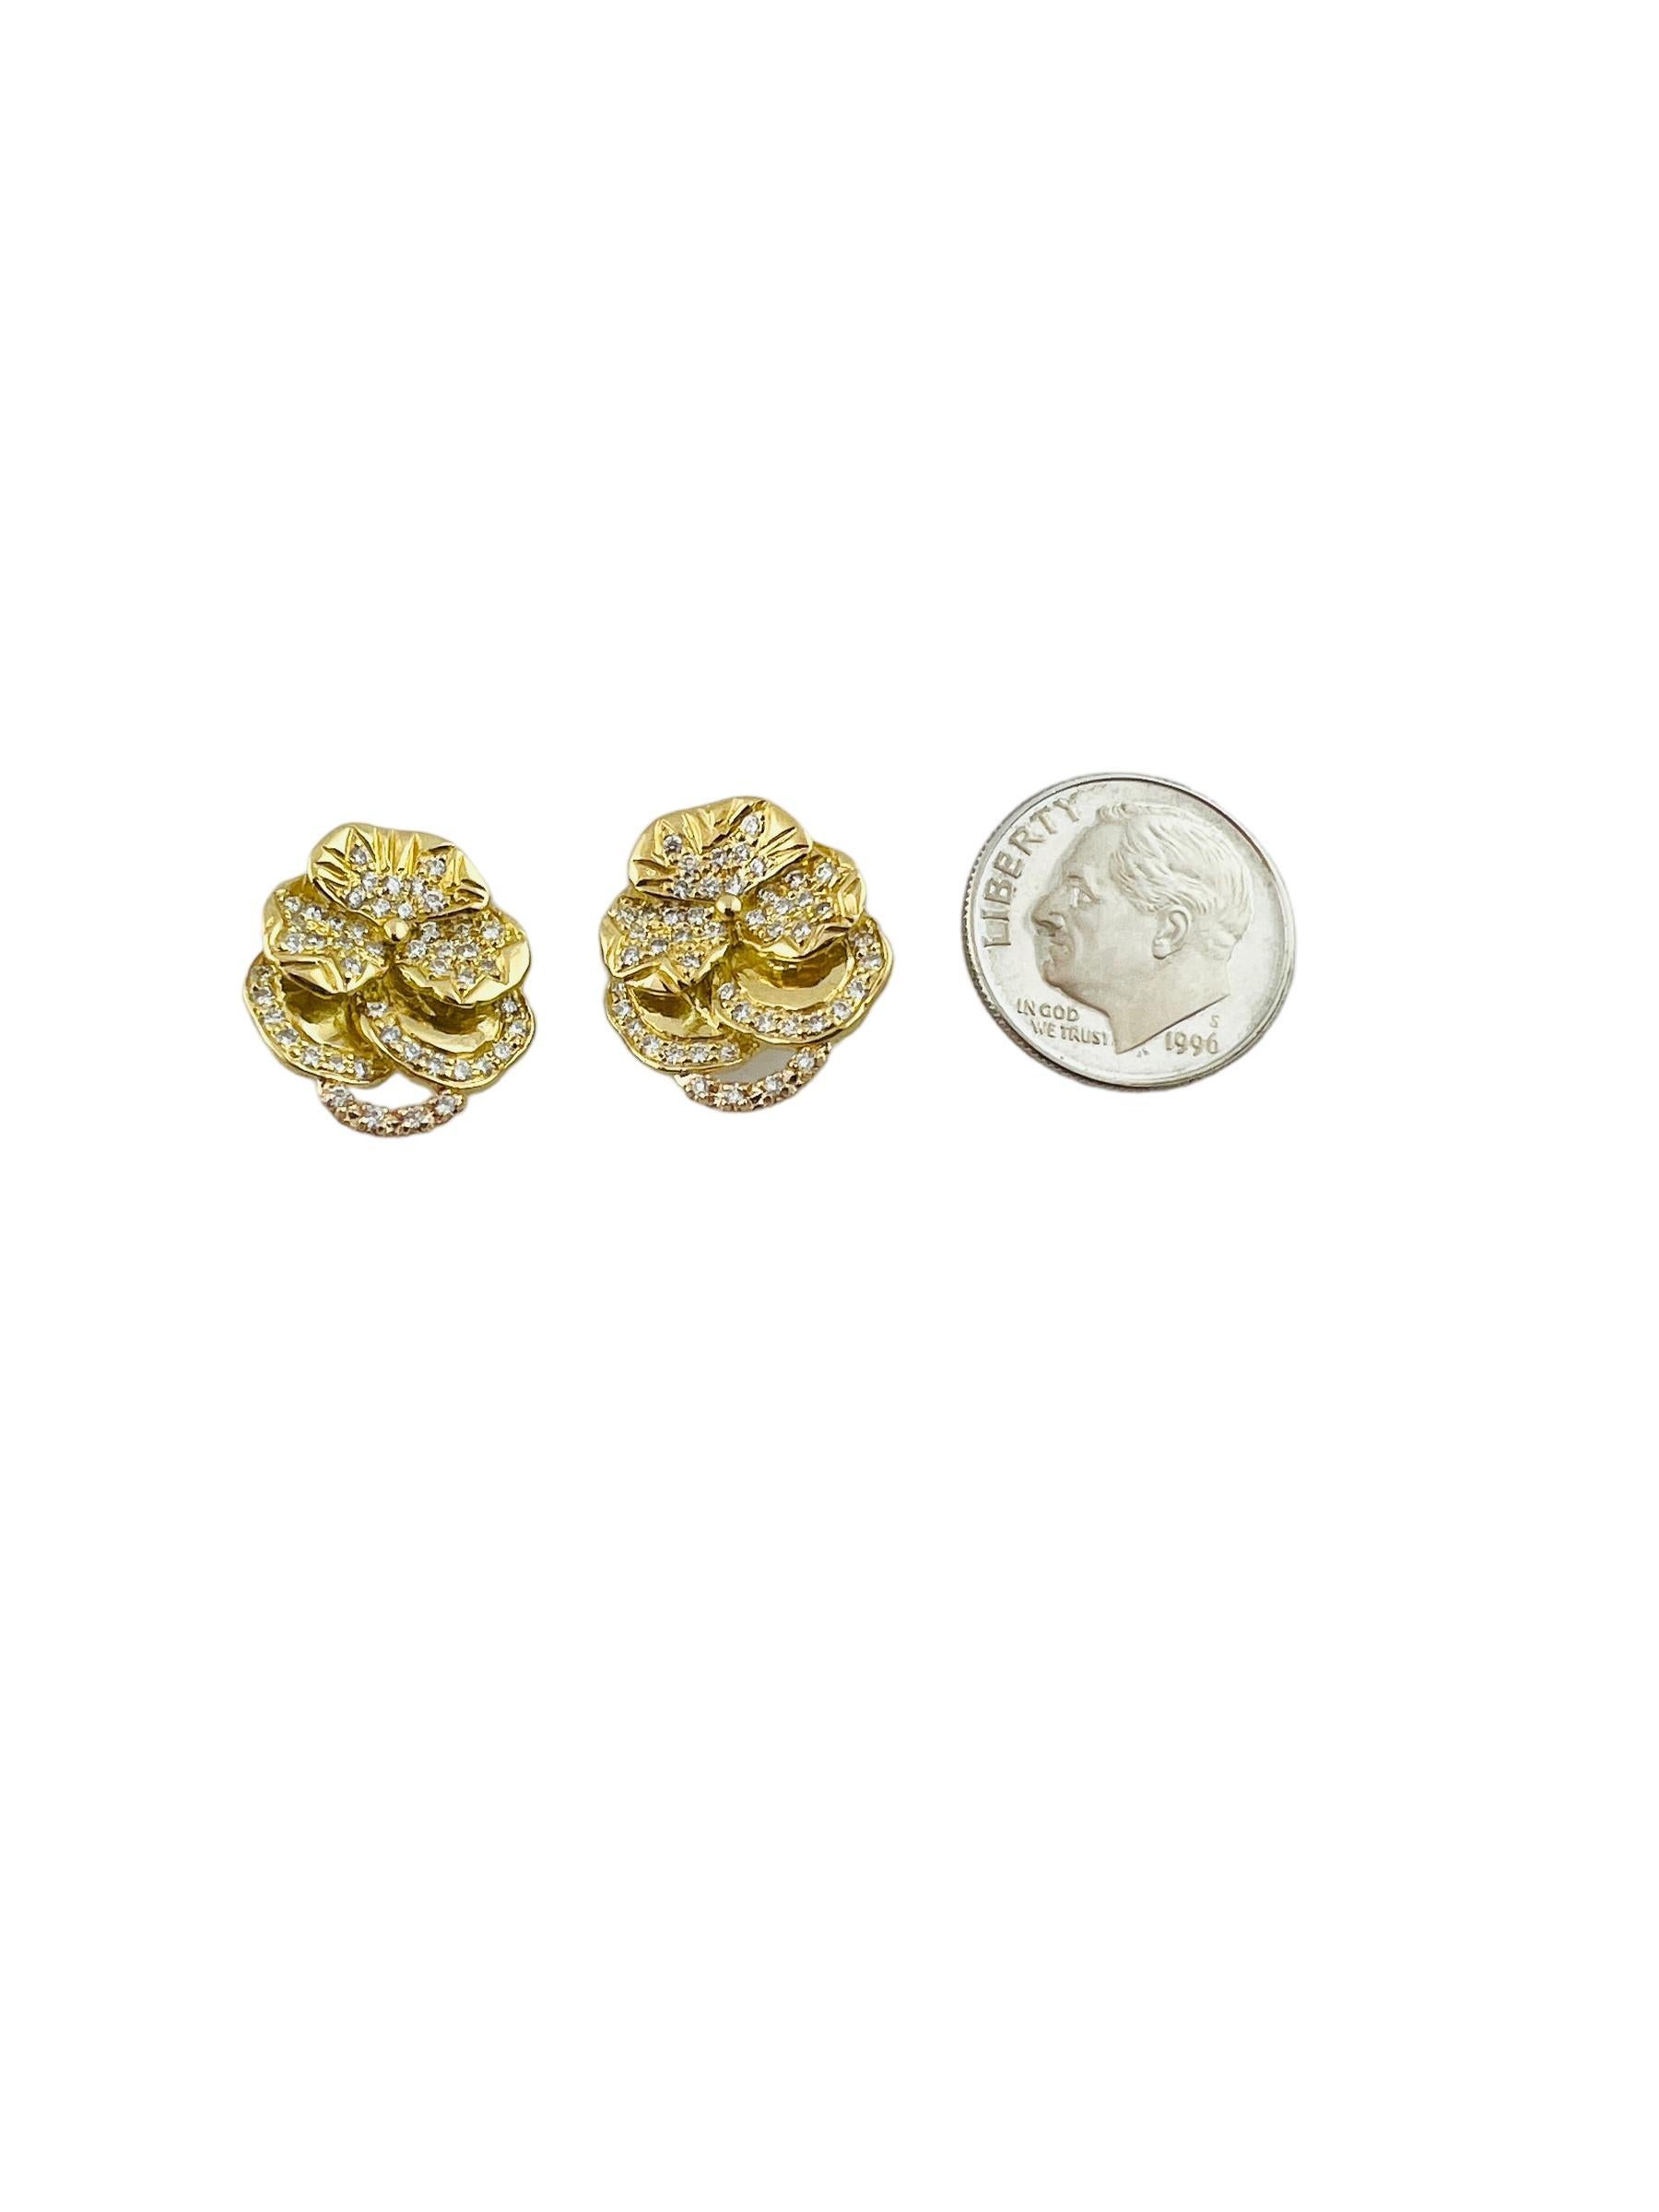 Mish NY 18K Yellow Gold Diamond Pansy Flower Earring Enhancers #15422 In Good Condition For Sale In Washington Depot, CT